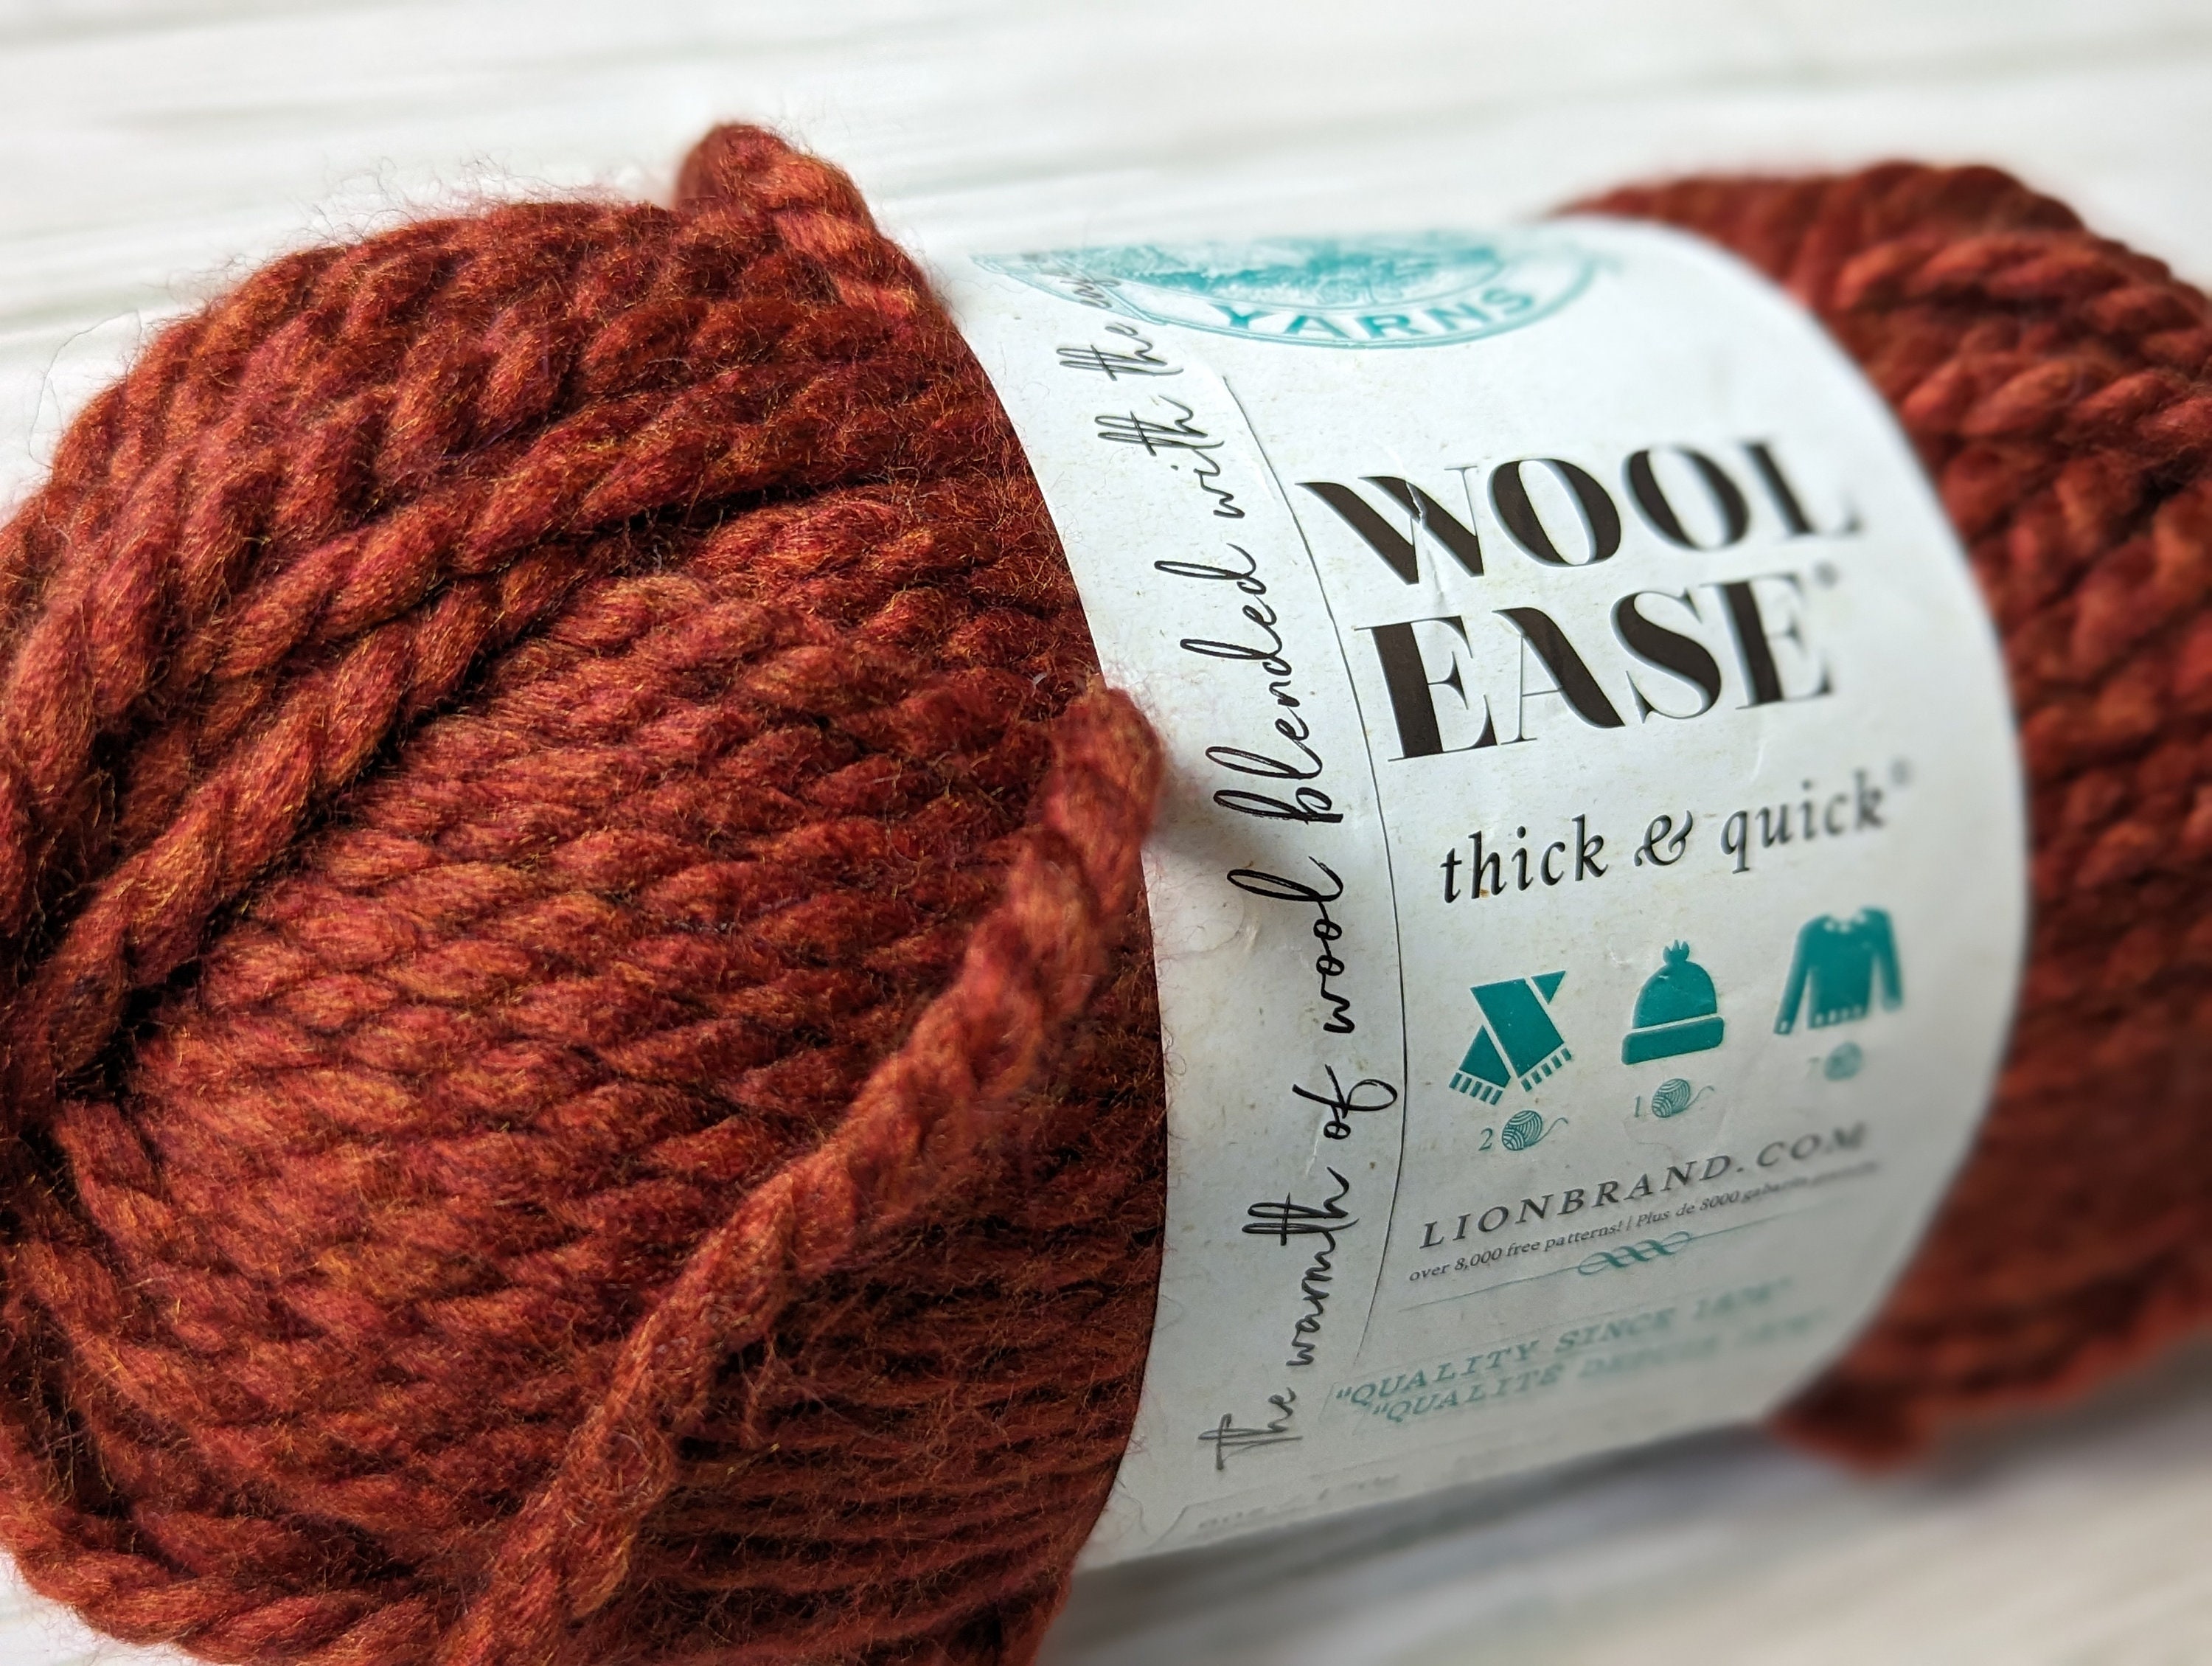 Spice Market Lion Brand Wool Ease Thick and Quick Yarn Skein Super Bulky  Bonus Bundle 10 oz